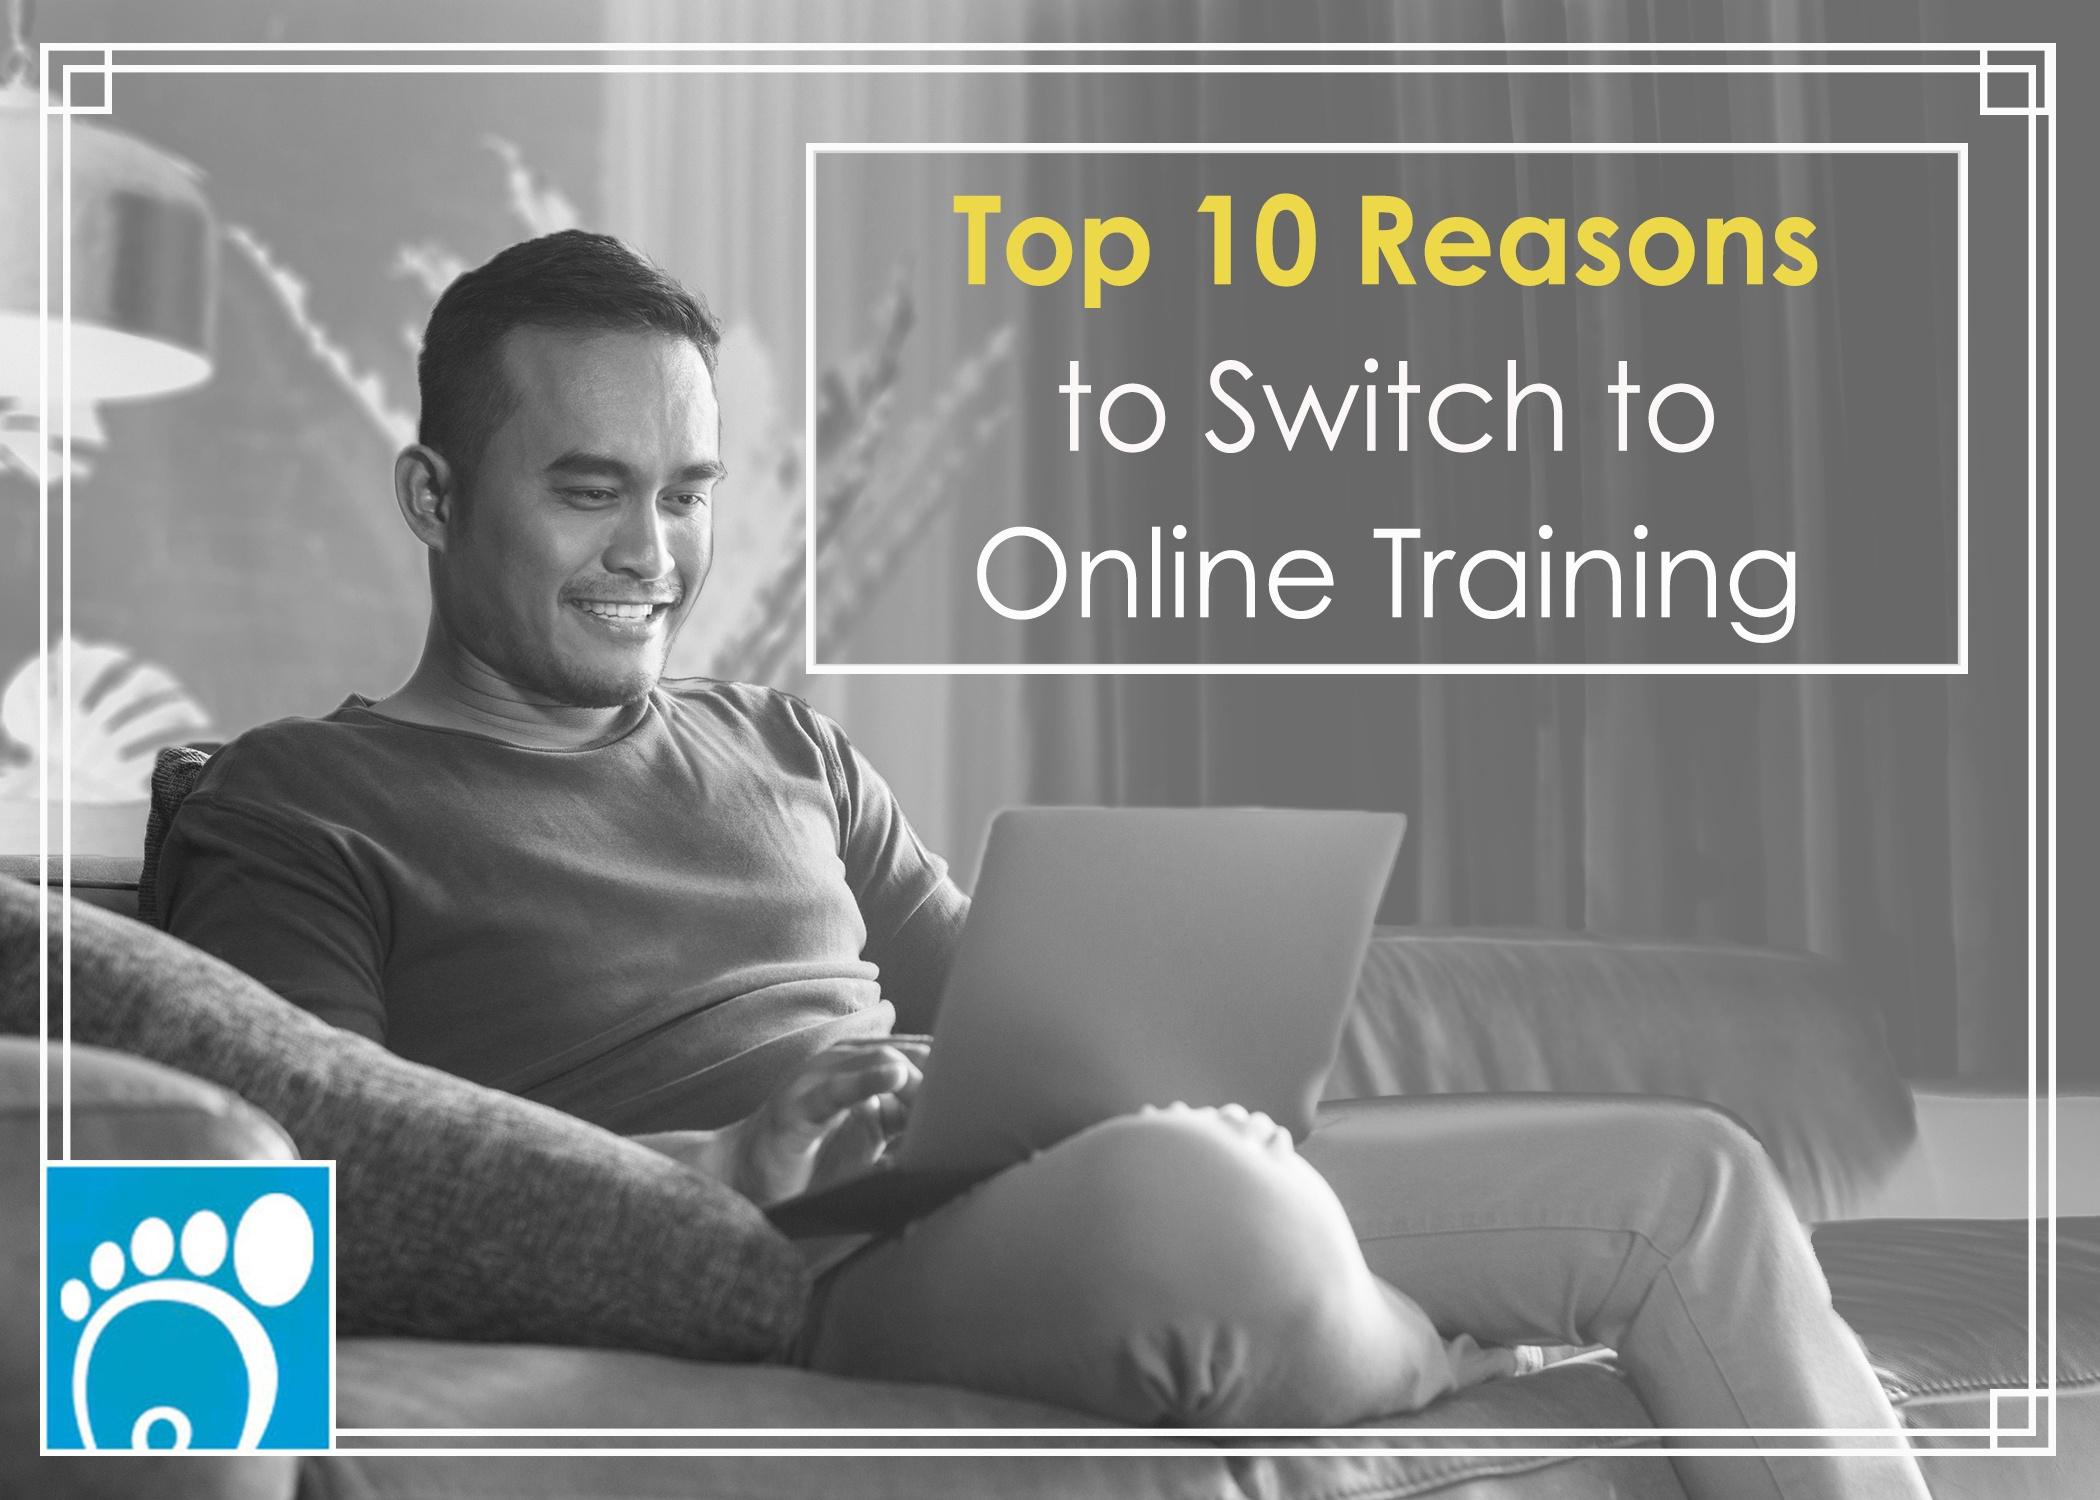 Top 10 Reasons to Switch to Online Training